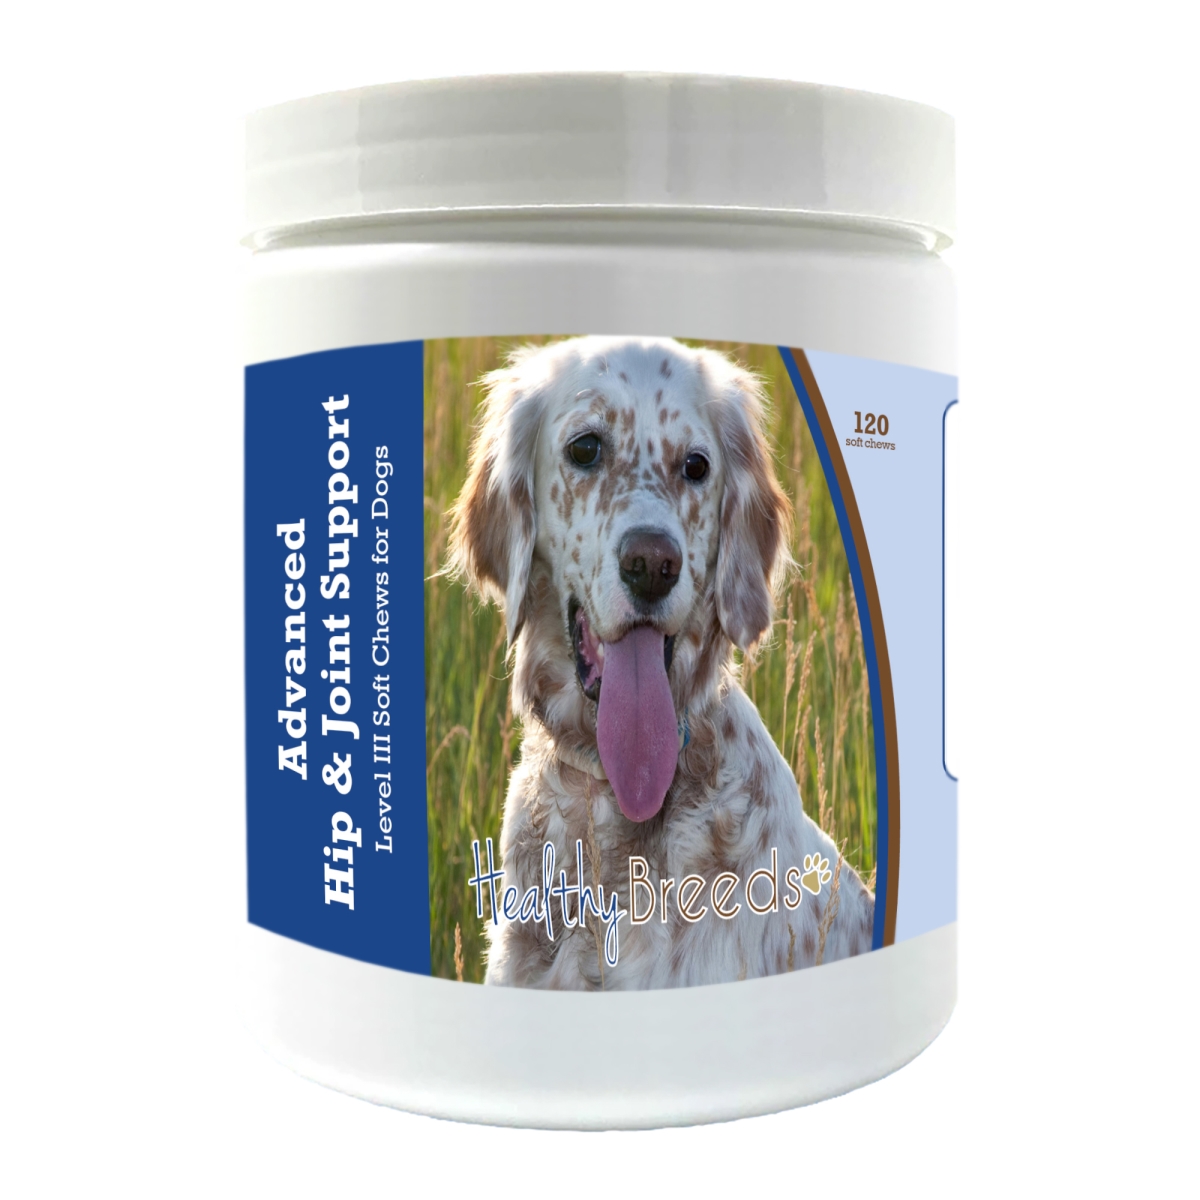 Picture of Healthy Breeds 192959898194 English Setter Advanced Hip & Joint Support Level III Soft Chews for Dogs